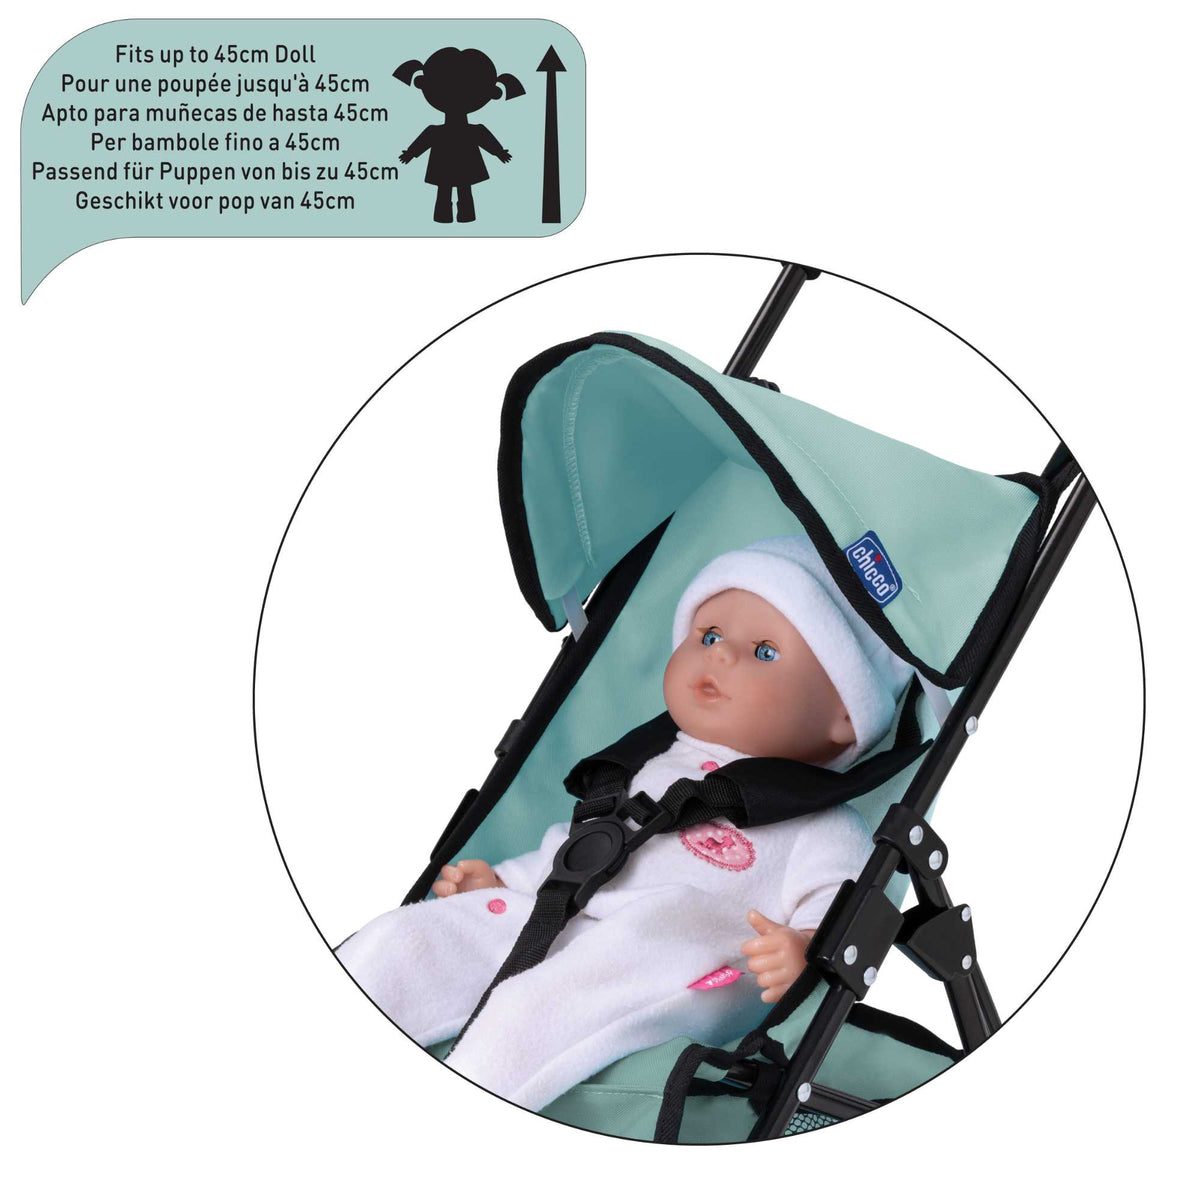 Chicco Echo Dolls Stroller - Lightweight, Durable, and Stylish Toy Stroller for Kids&#39; Playtime